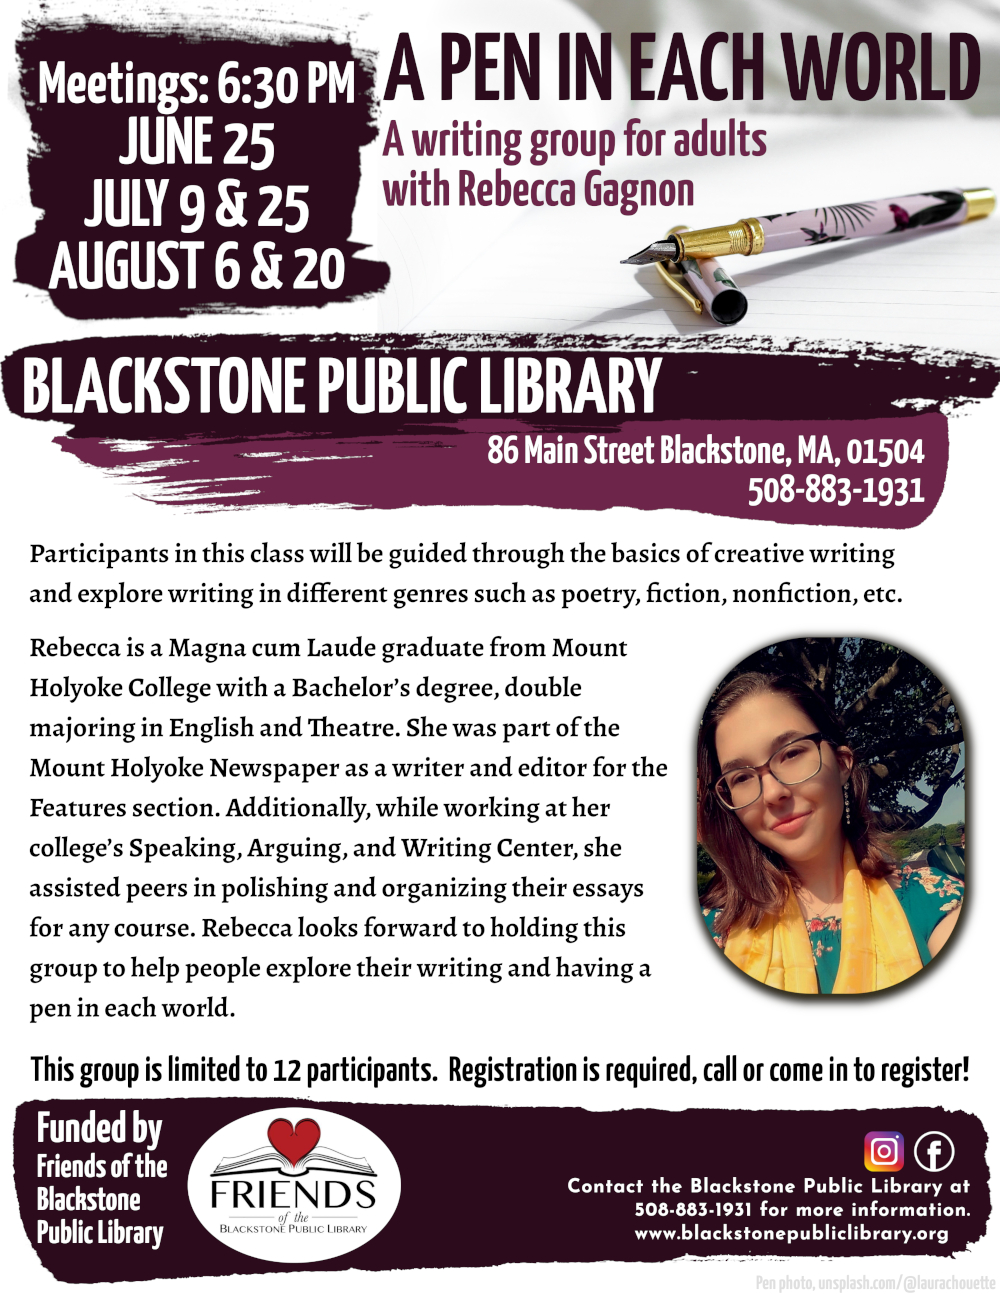 A Pen in Each World: A writing group for adults with Rebecca Gagnon.  Meetings will be at 6:30 PM on June 25, July 9 & 25, and August 6 & 20.  Flyer image behind the event title is a fountain pen resting on a bright white notebook. The pen is pale pink with a tropical bird and plant pattern in black and various shades of maroon. Below, near the event description, there is also a portrait of Rebecca Gagnon. 	 Participants in this class will be guided through the basics of creative writing and explore writing in different genres such as poetry, fiction, nonfiction, etc.  Rebecca is a Magna cum Laude graduate from Mount Holyoke College with a Bachelor’s degree, double majoring in English and Theatre. She was part of the Mount Holyoke Newspaper as a writer and editor for the Features section. Additionally, while working at her college’s Speaking, Arguing, and Writing Center, she assisted peers in polishing and organizing their essays for any course. Rebecca looks forward to holding this group to help people explore their writing and having a pen in each world.  Registration is required. This group is limited to 12 participants. Call the Blackstone Public Library at 508-883-1931 to register, or for more information.  Funded by the Friends of the Blackstone Public Library.